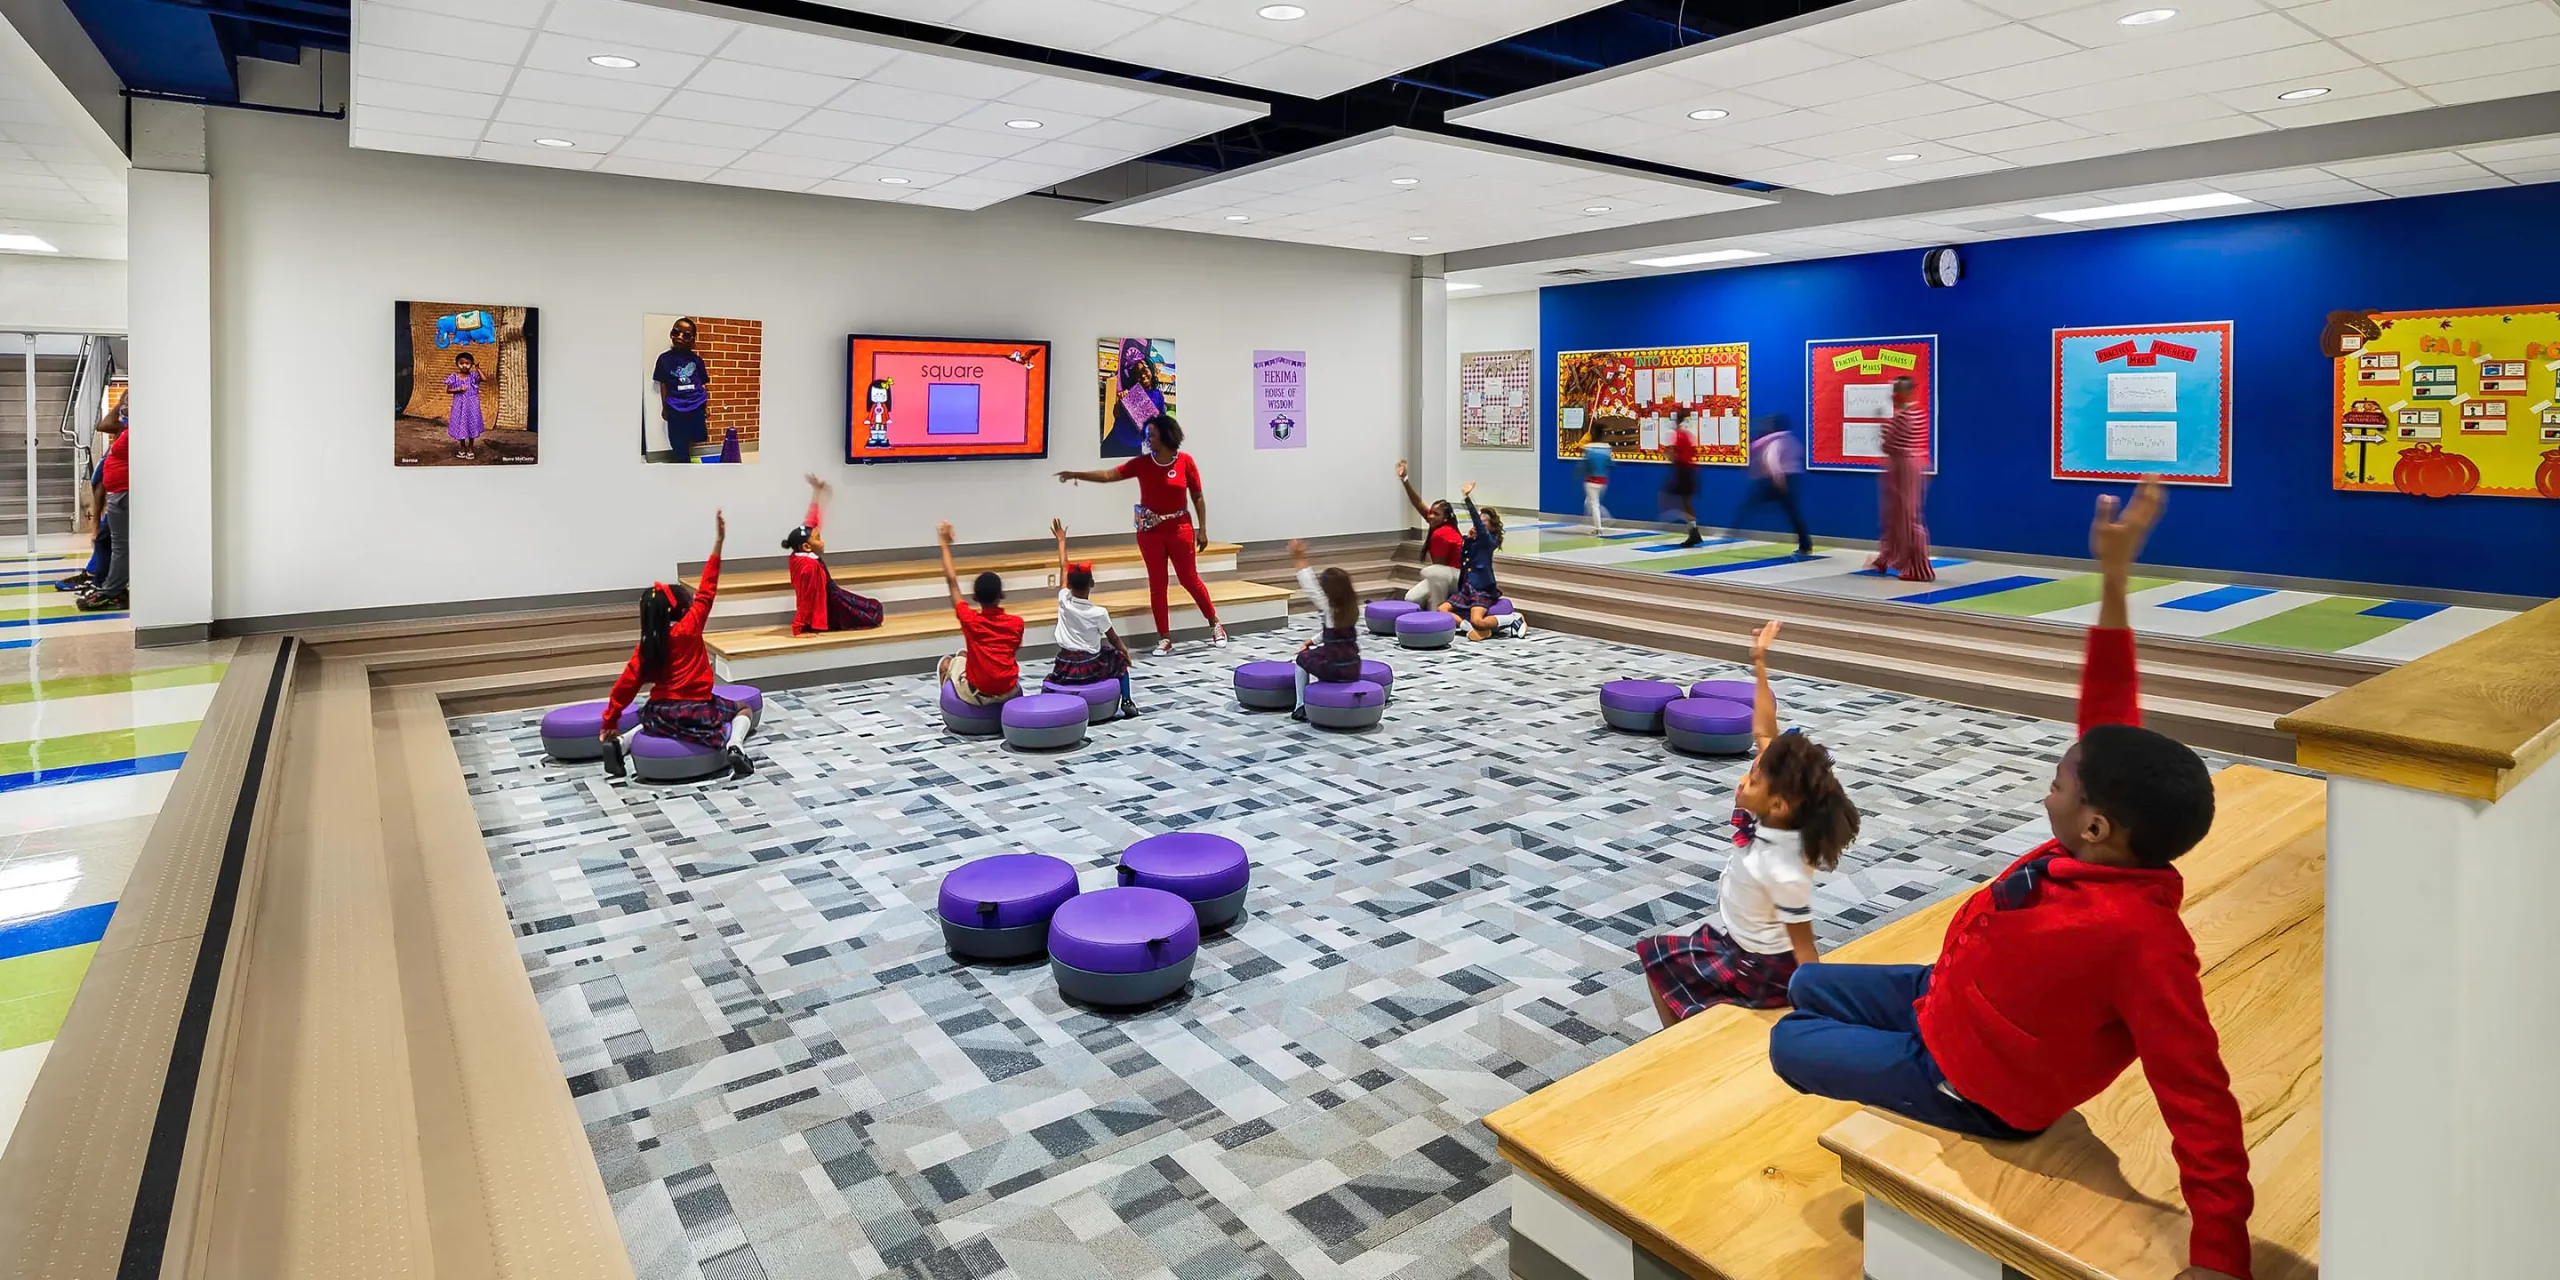 Barrack and Michelle Obama Academy Open Classroom